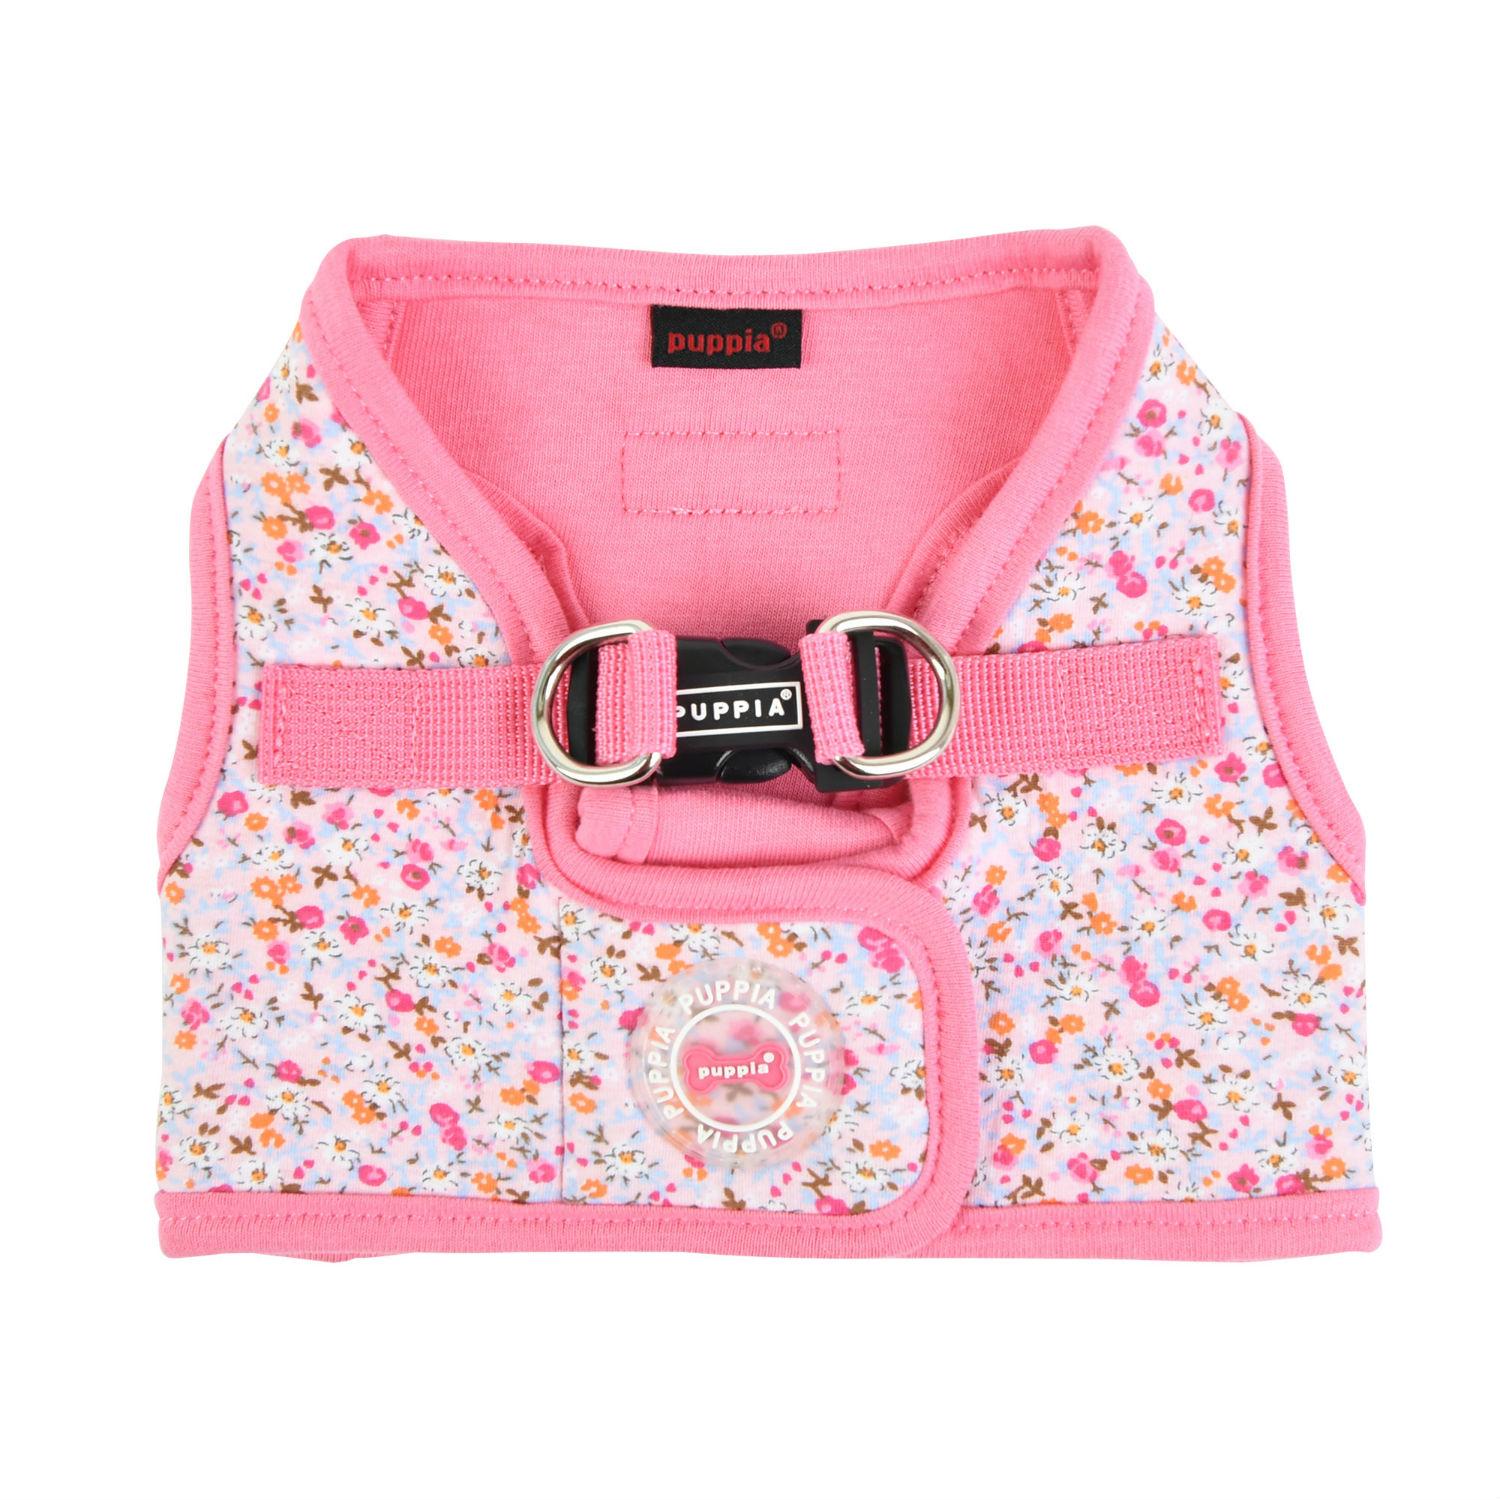 Wildflower Vest Dog Harness by Puppia - Pink